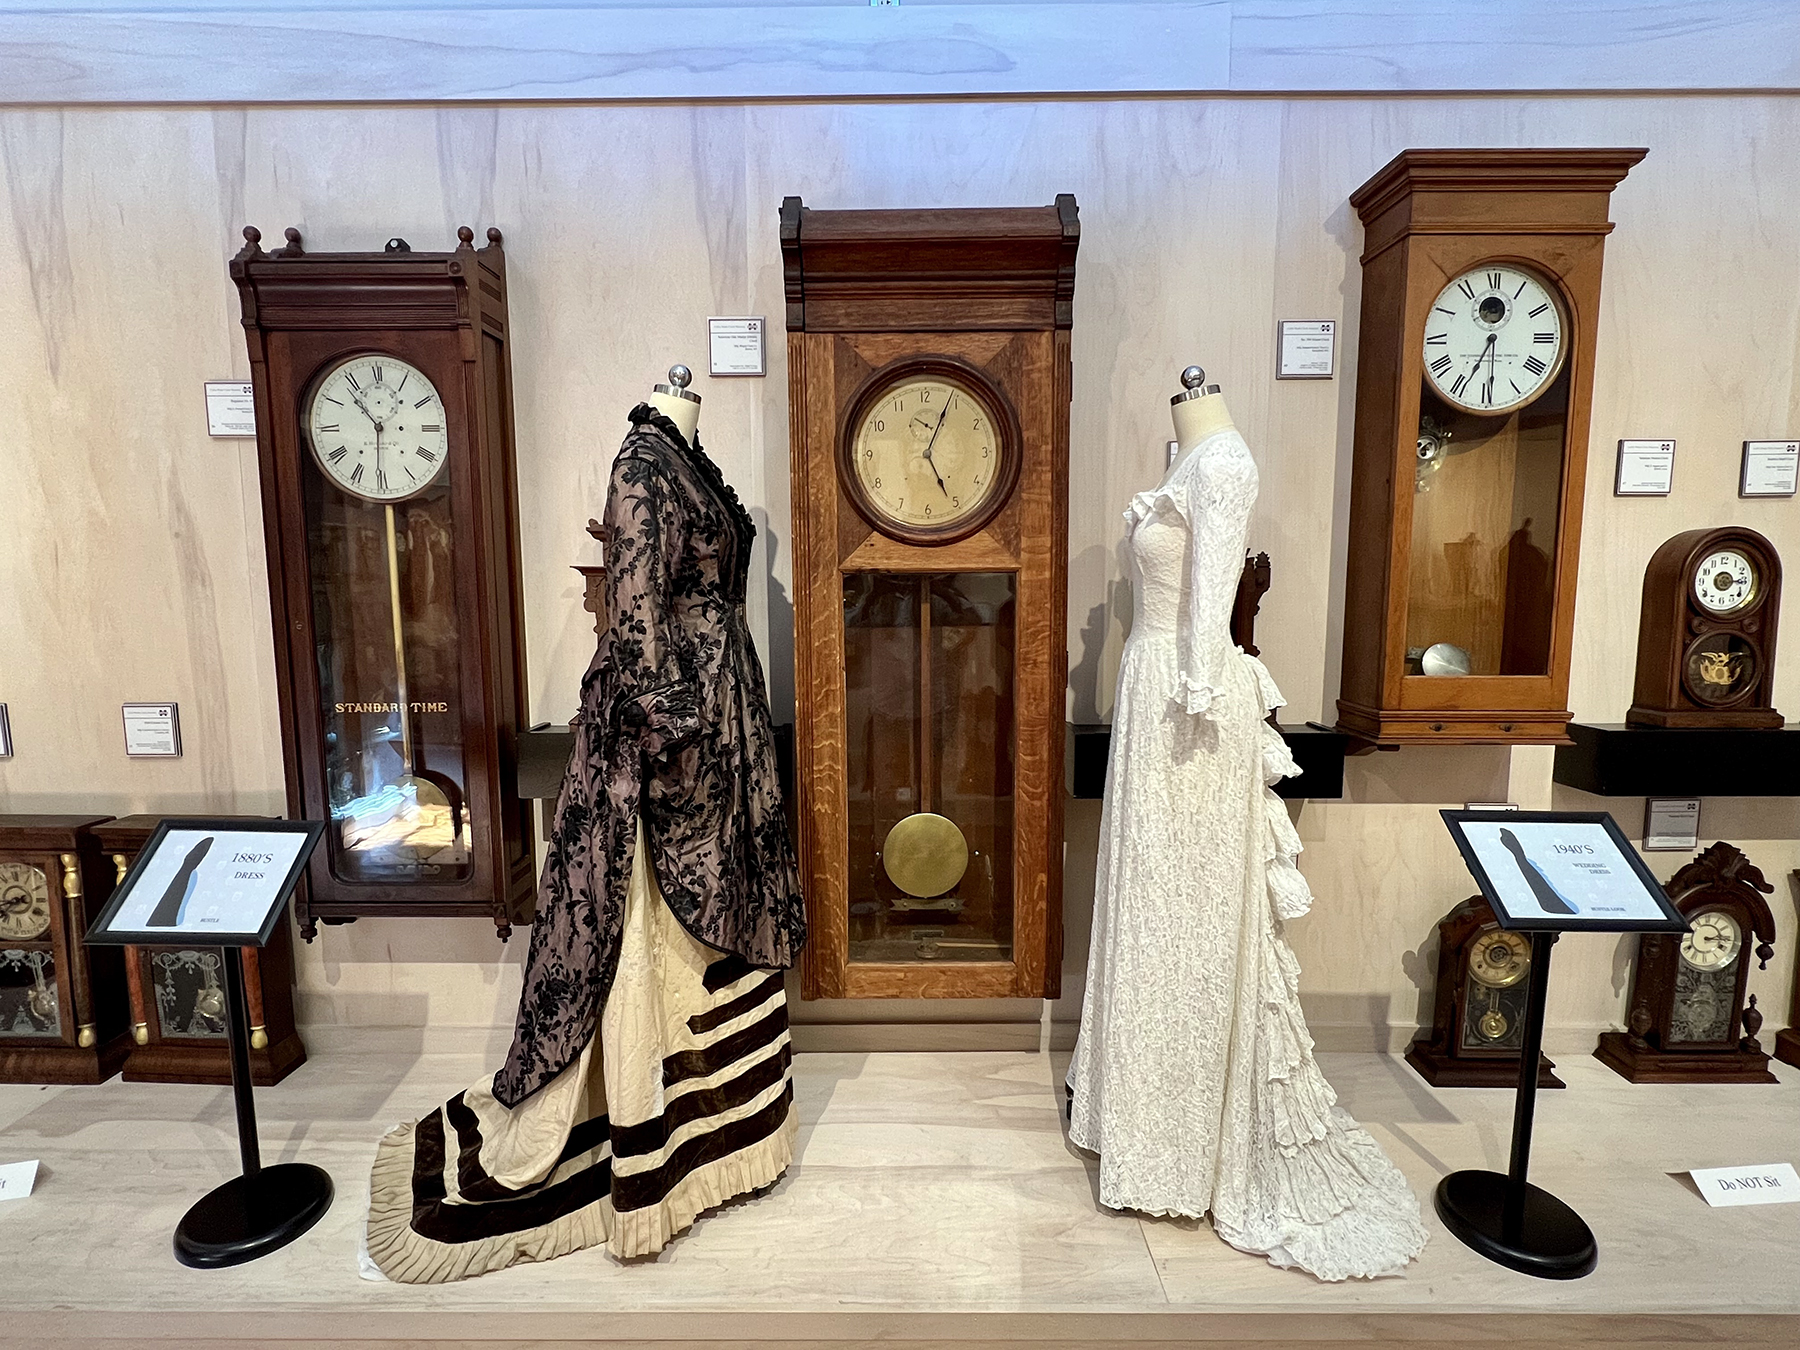 Two historic dresses on dress forms in front of historic wooden clocks.